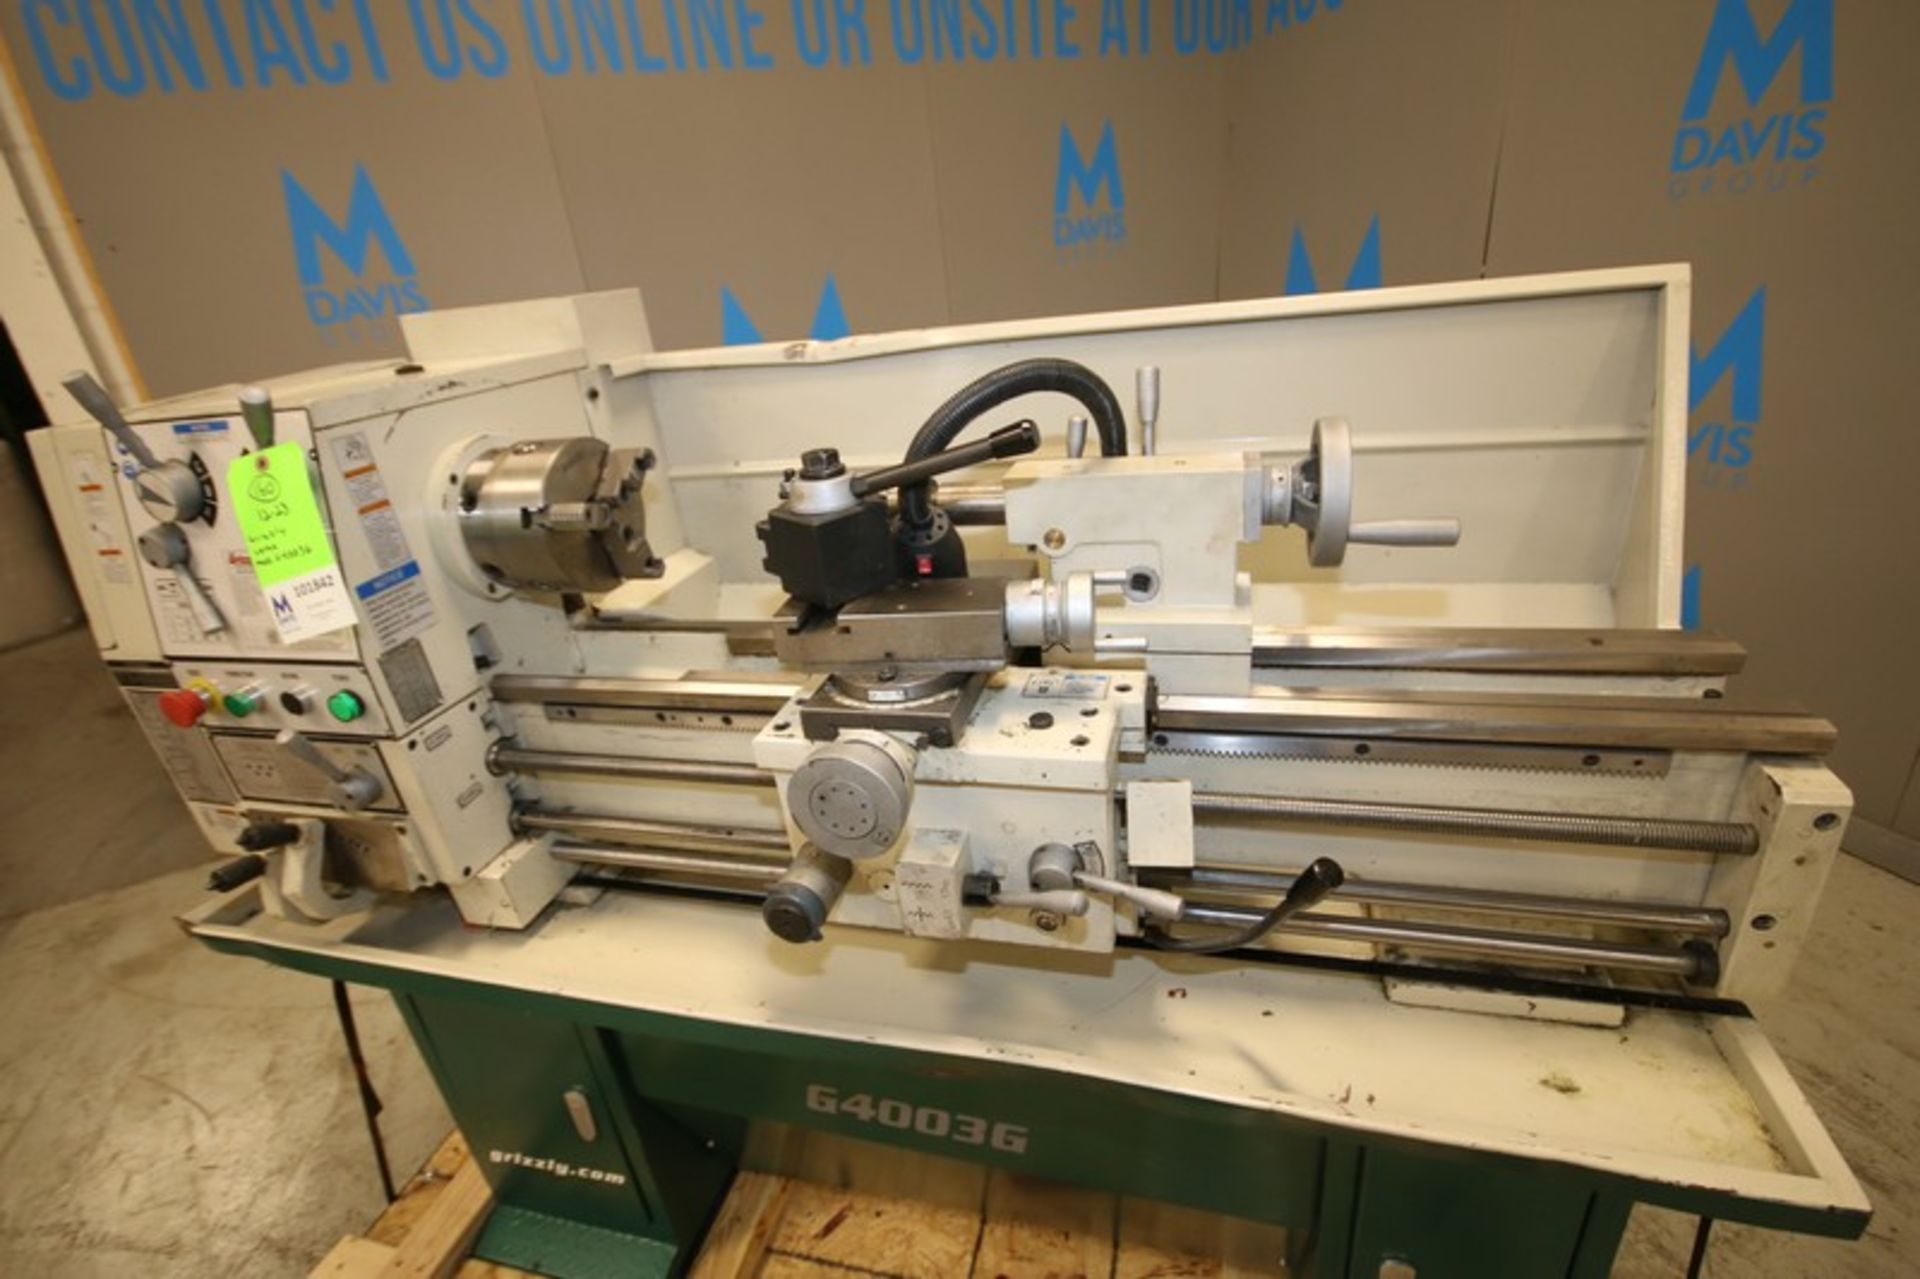 2021 Grizzley 12" x 36" Gunsmith's Lathe, Model G4003G, SN 0120050339, with 2 hp Motor, 220V, - Image 2 of 14